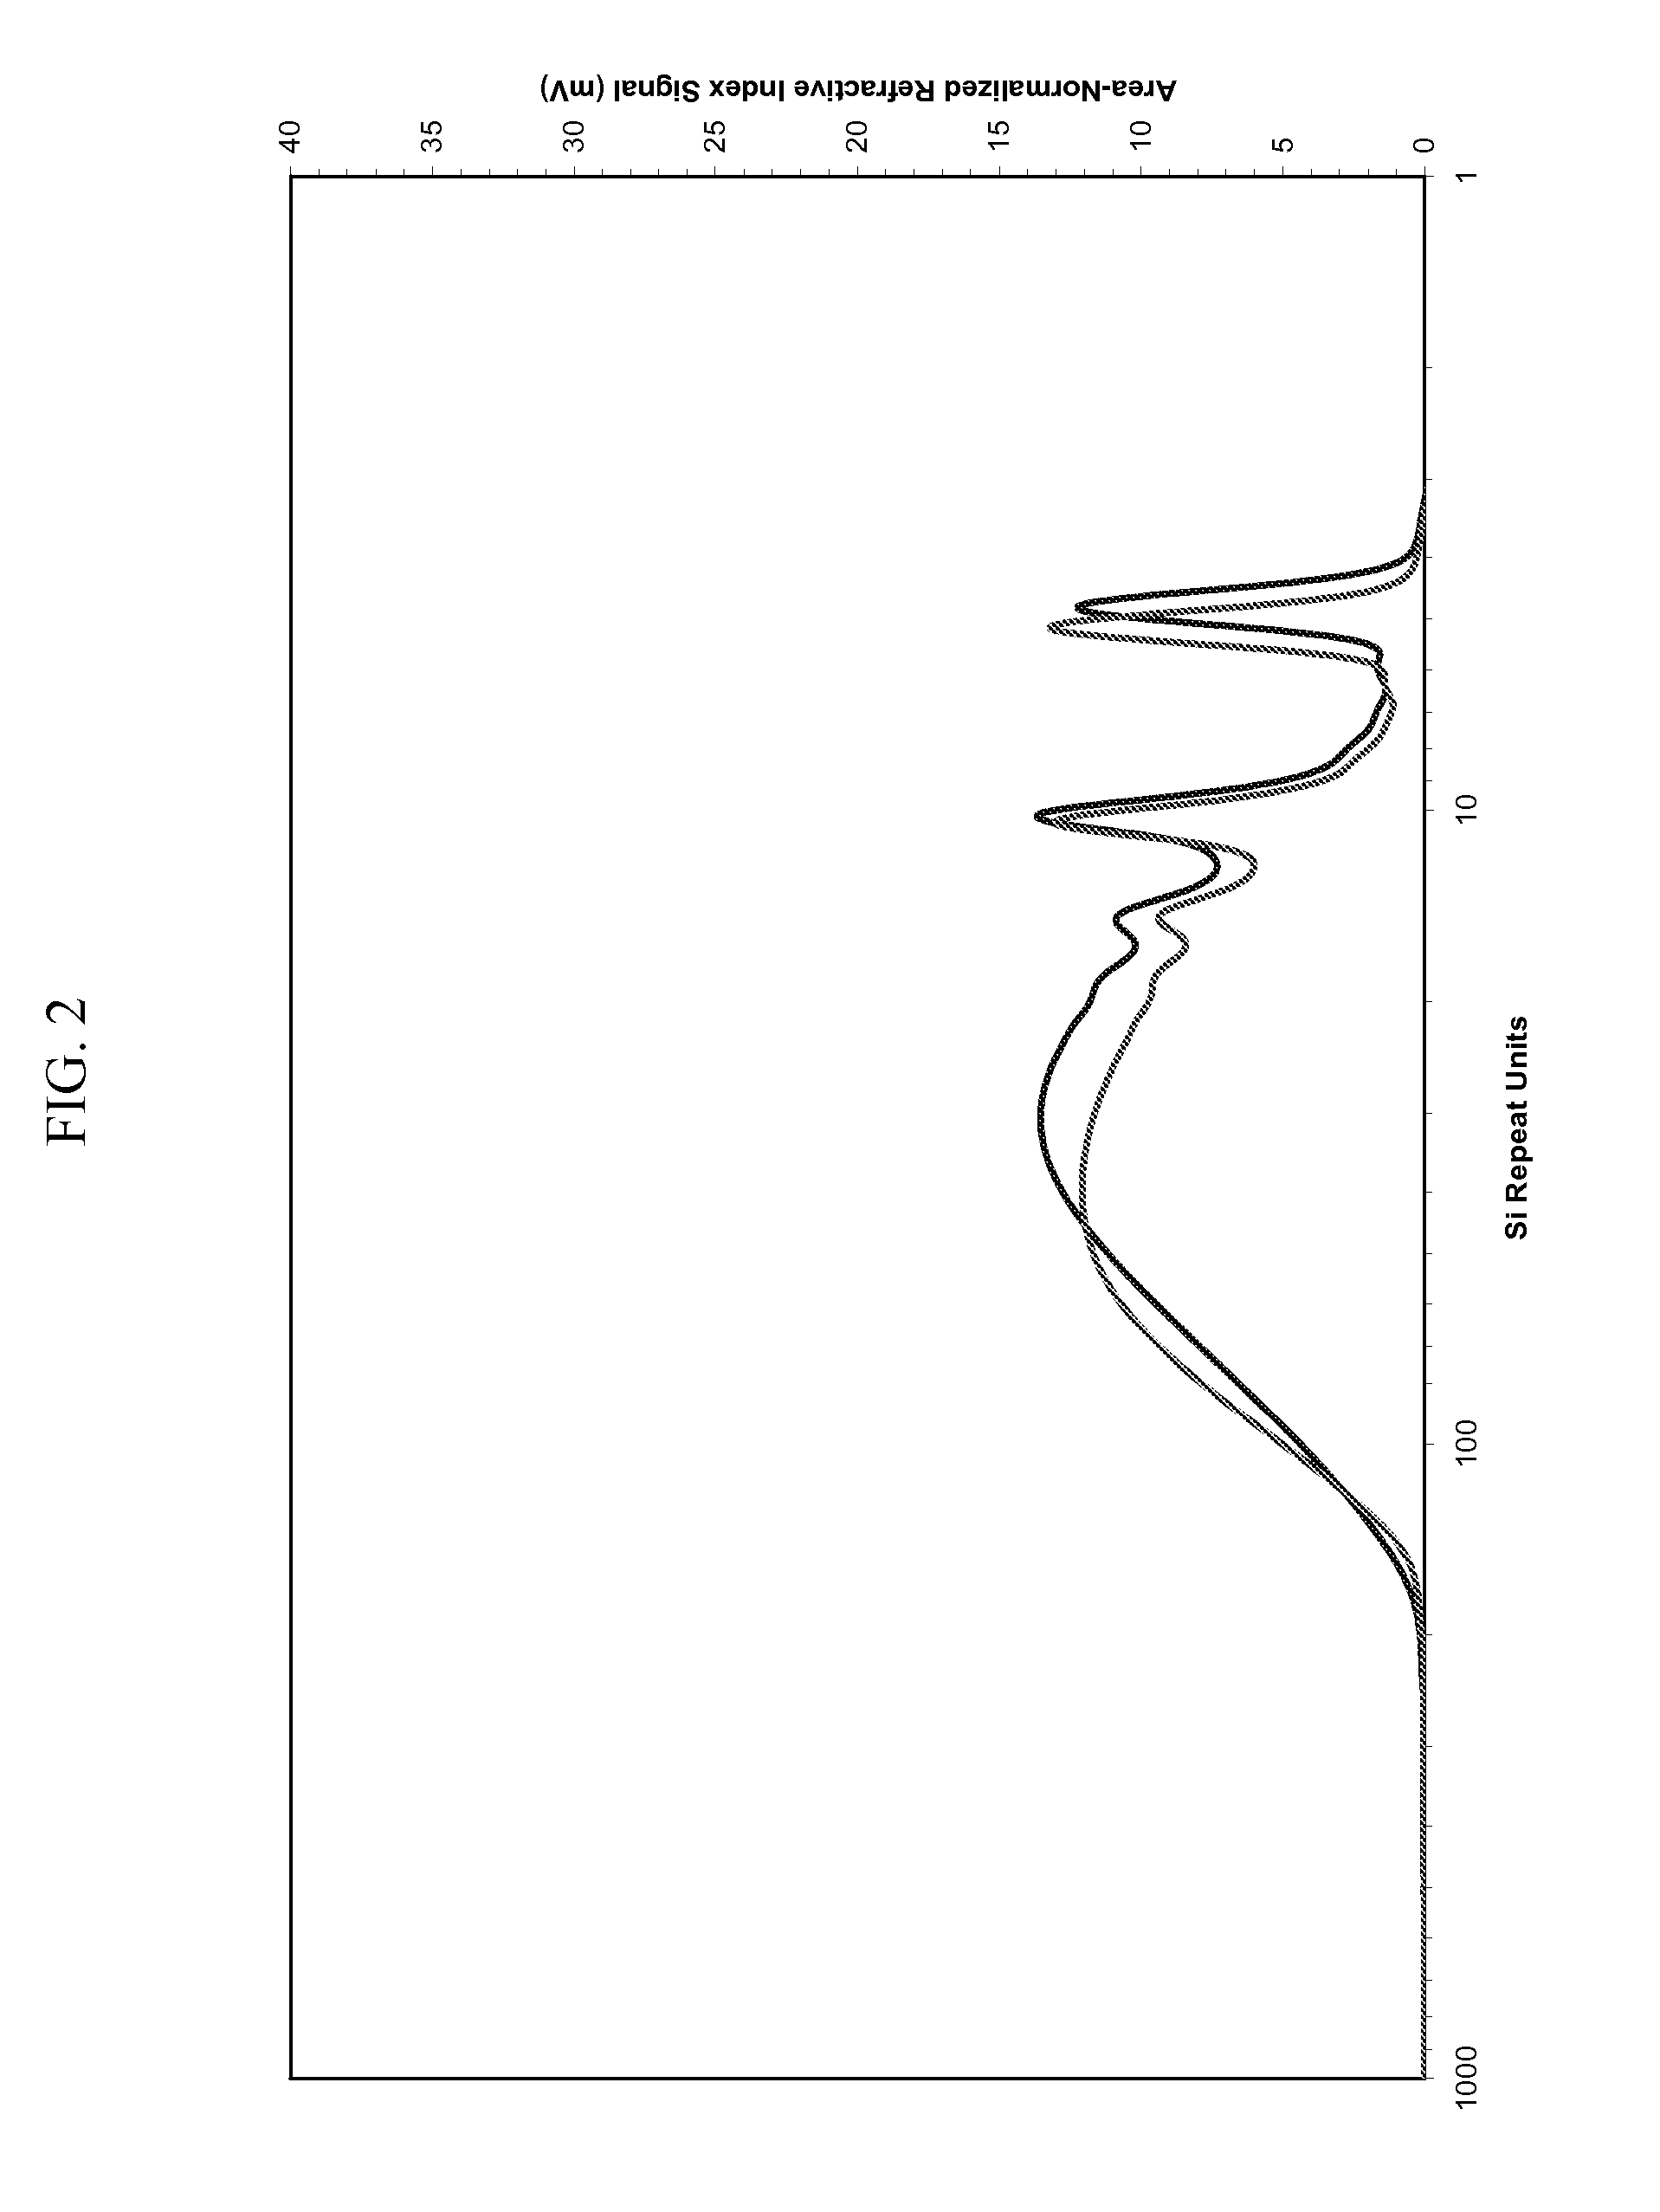 Silicon Polymers, Methods of Polymerizing Silicon Compounds, and Methods of Forming Thin Films from Such Silicon Polymers